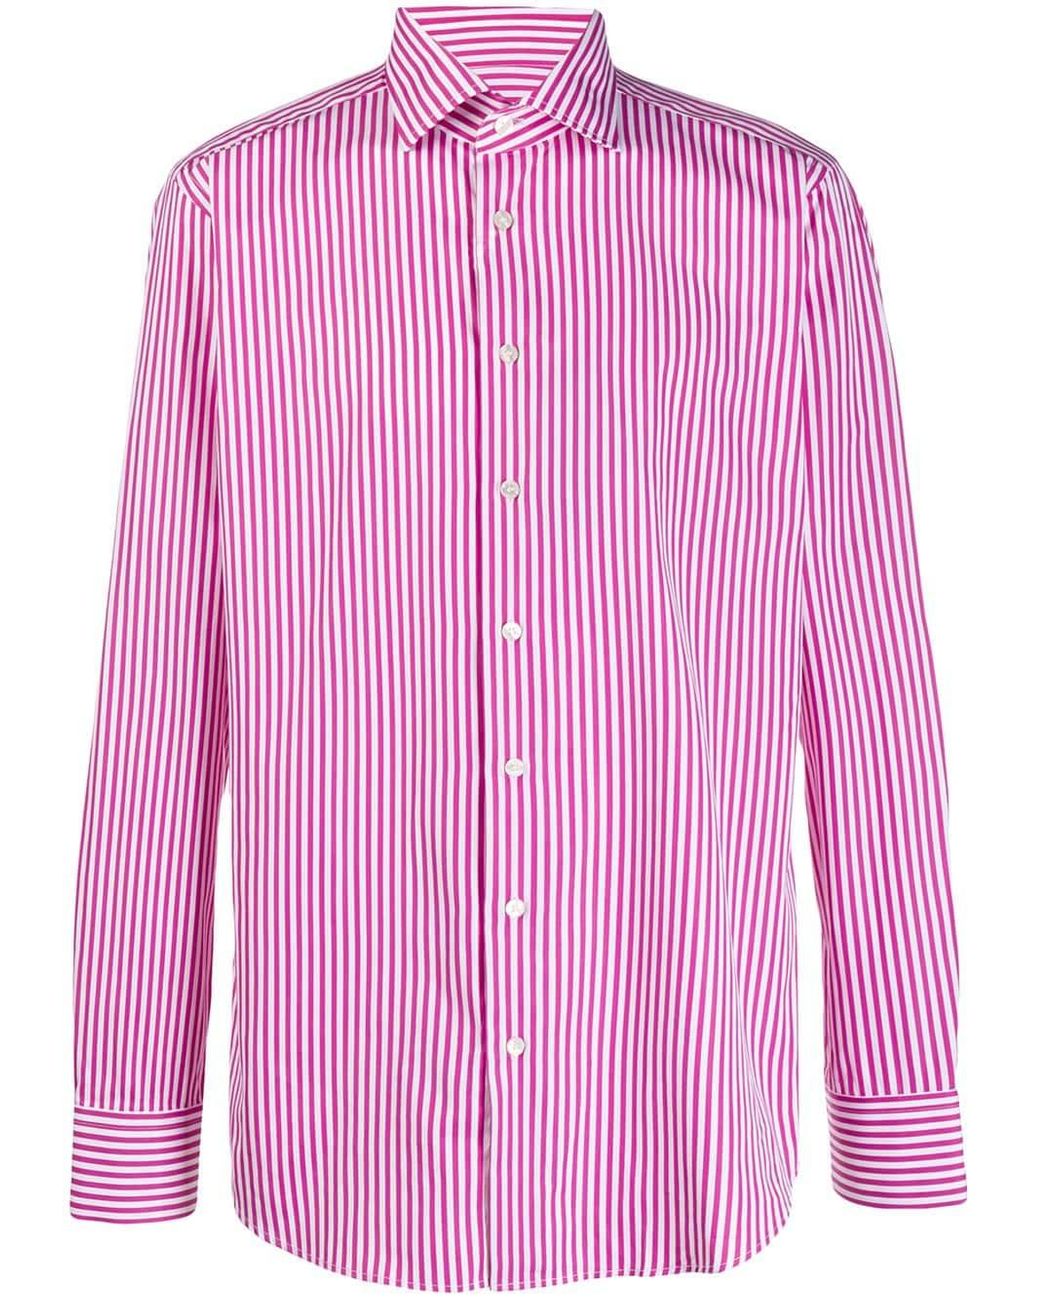 Etro Cotton Striped Shirt in Red for Men - Lyst